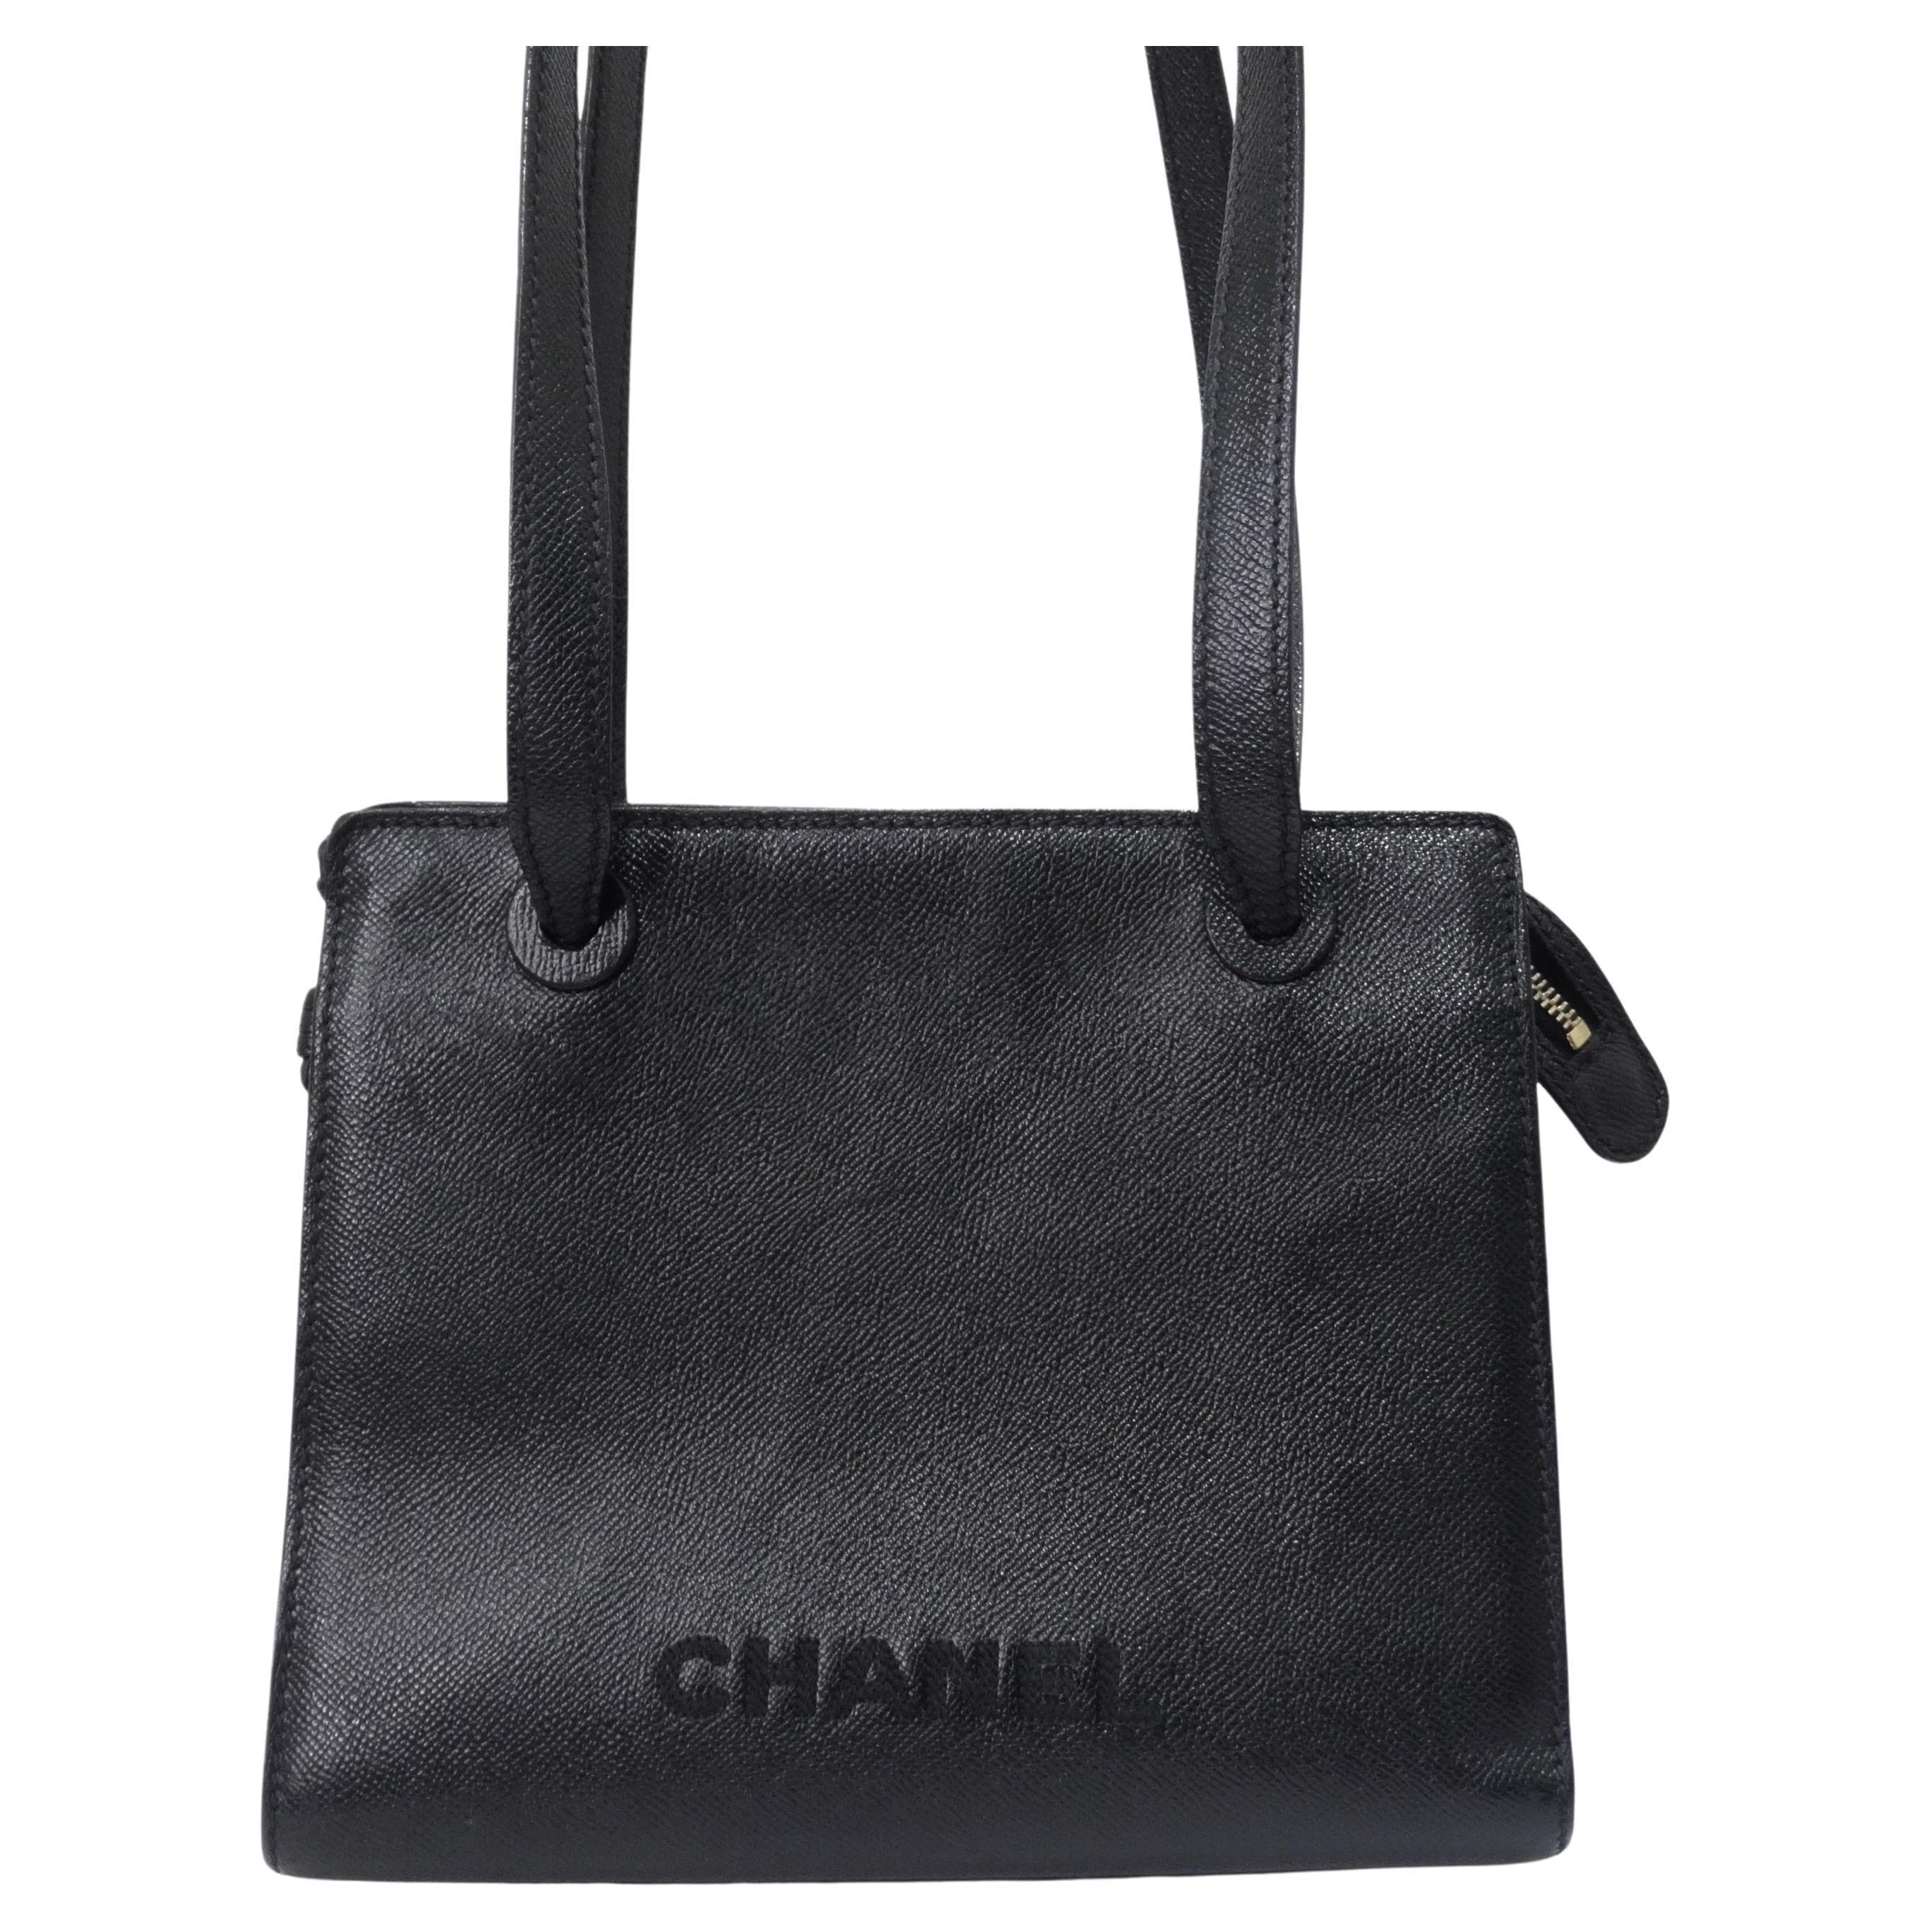 Simple and timeless black Chanel shoulder bag circa late 1990s. This is a great staple piece for anyone on the market for a new every day handbag that will match with every outfit and fit all of your belongings without weighing you down! Featuring a